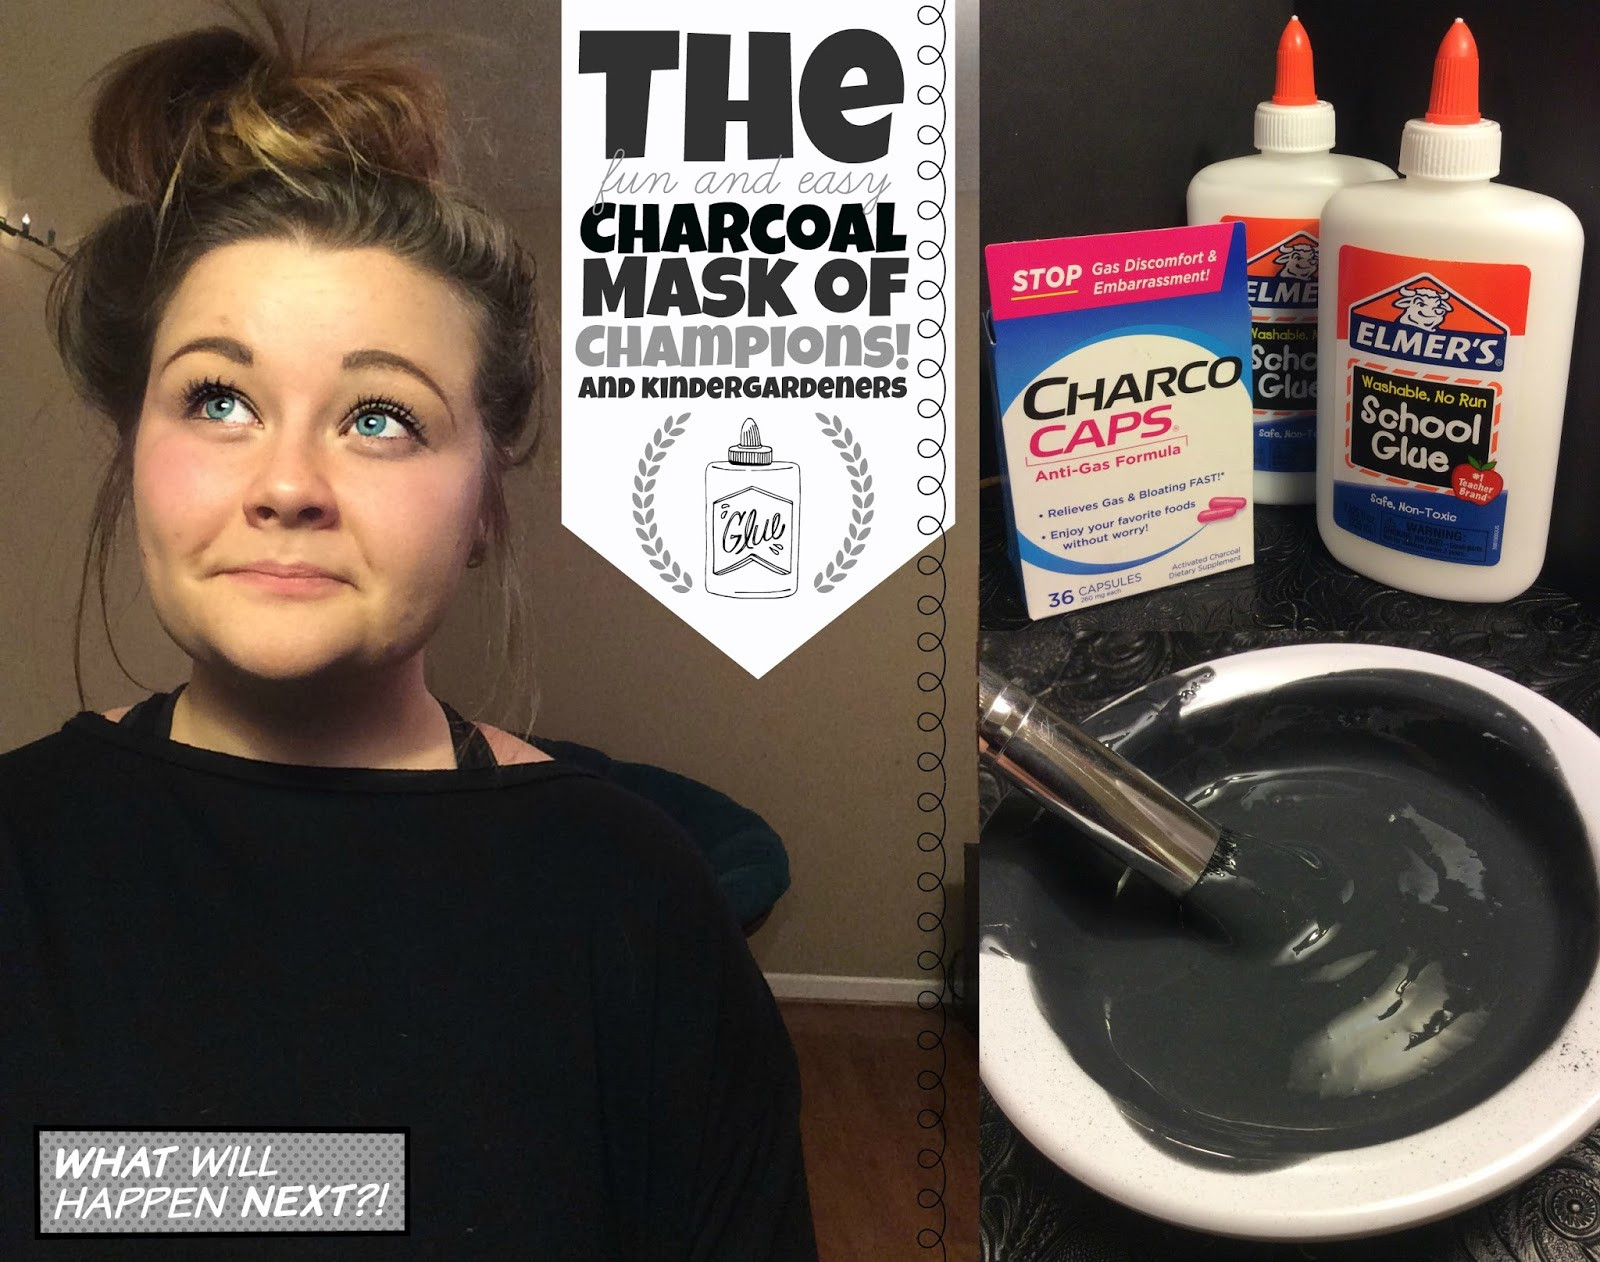 DIY Charcoal Mask With Glue
 sassy classy lassie DIY Charcoal Mask